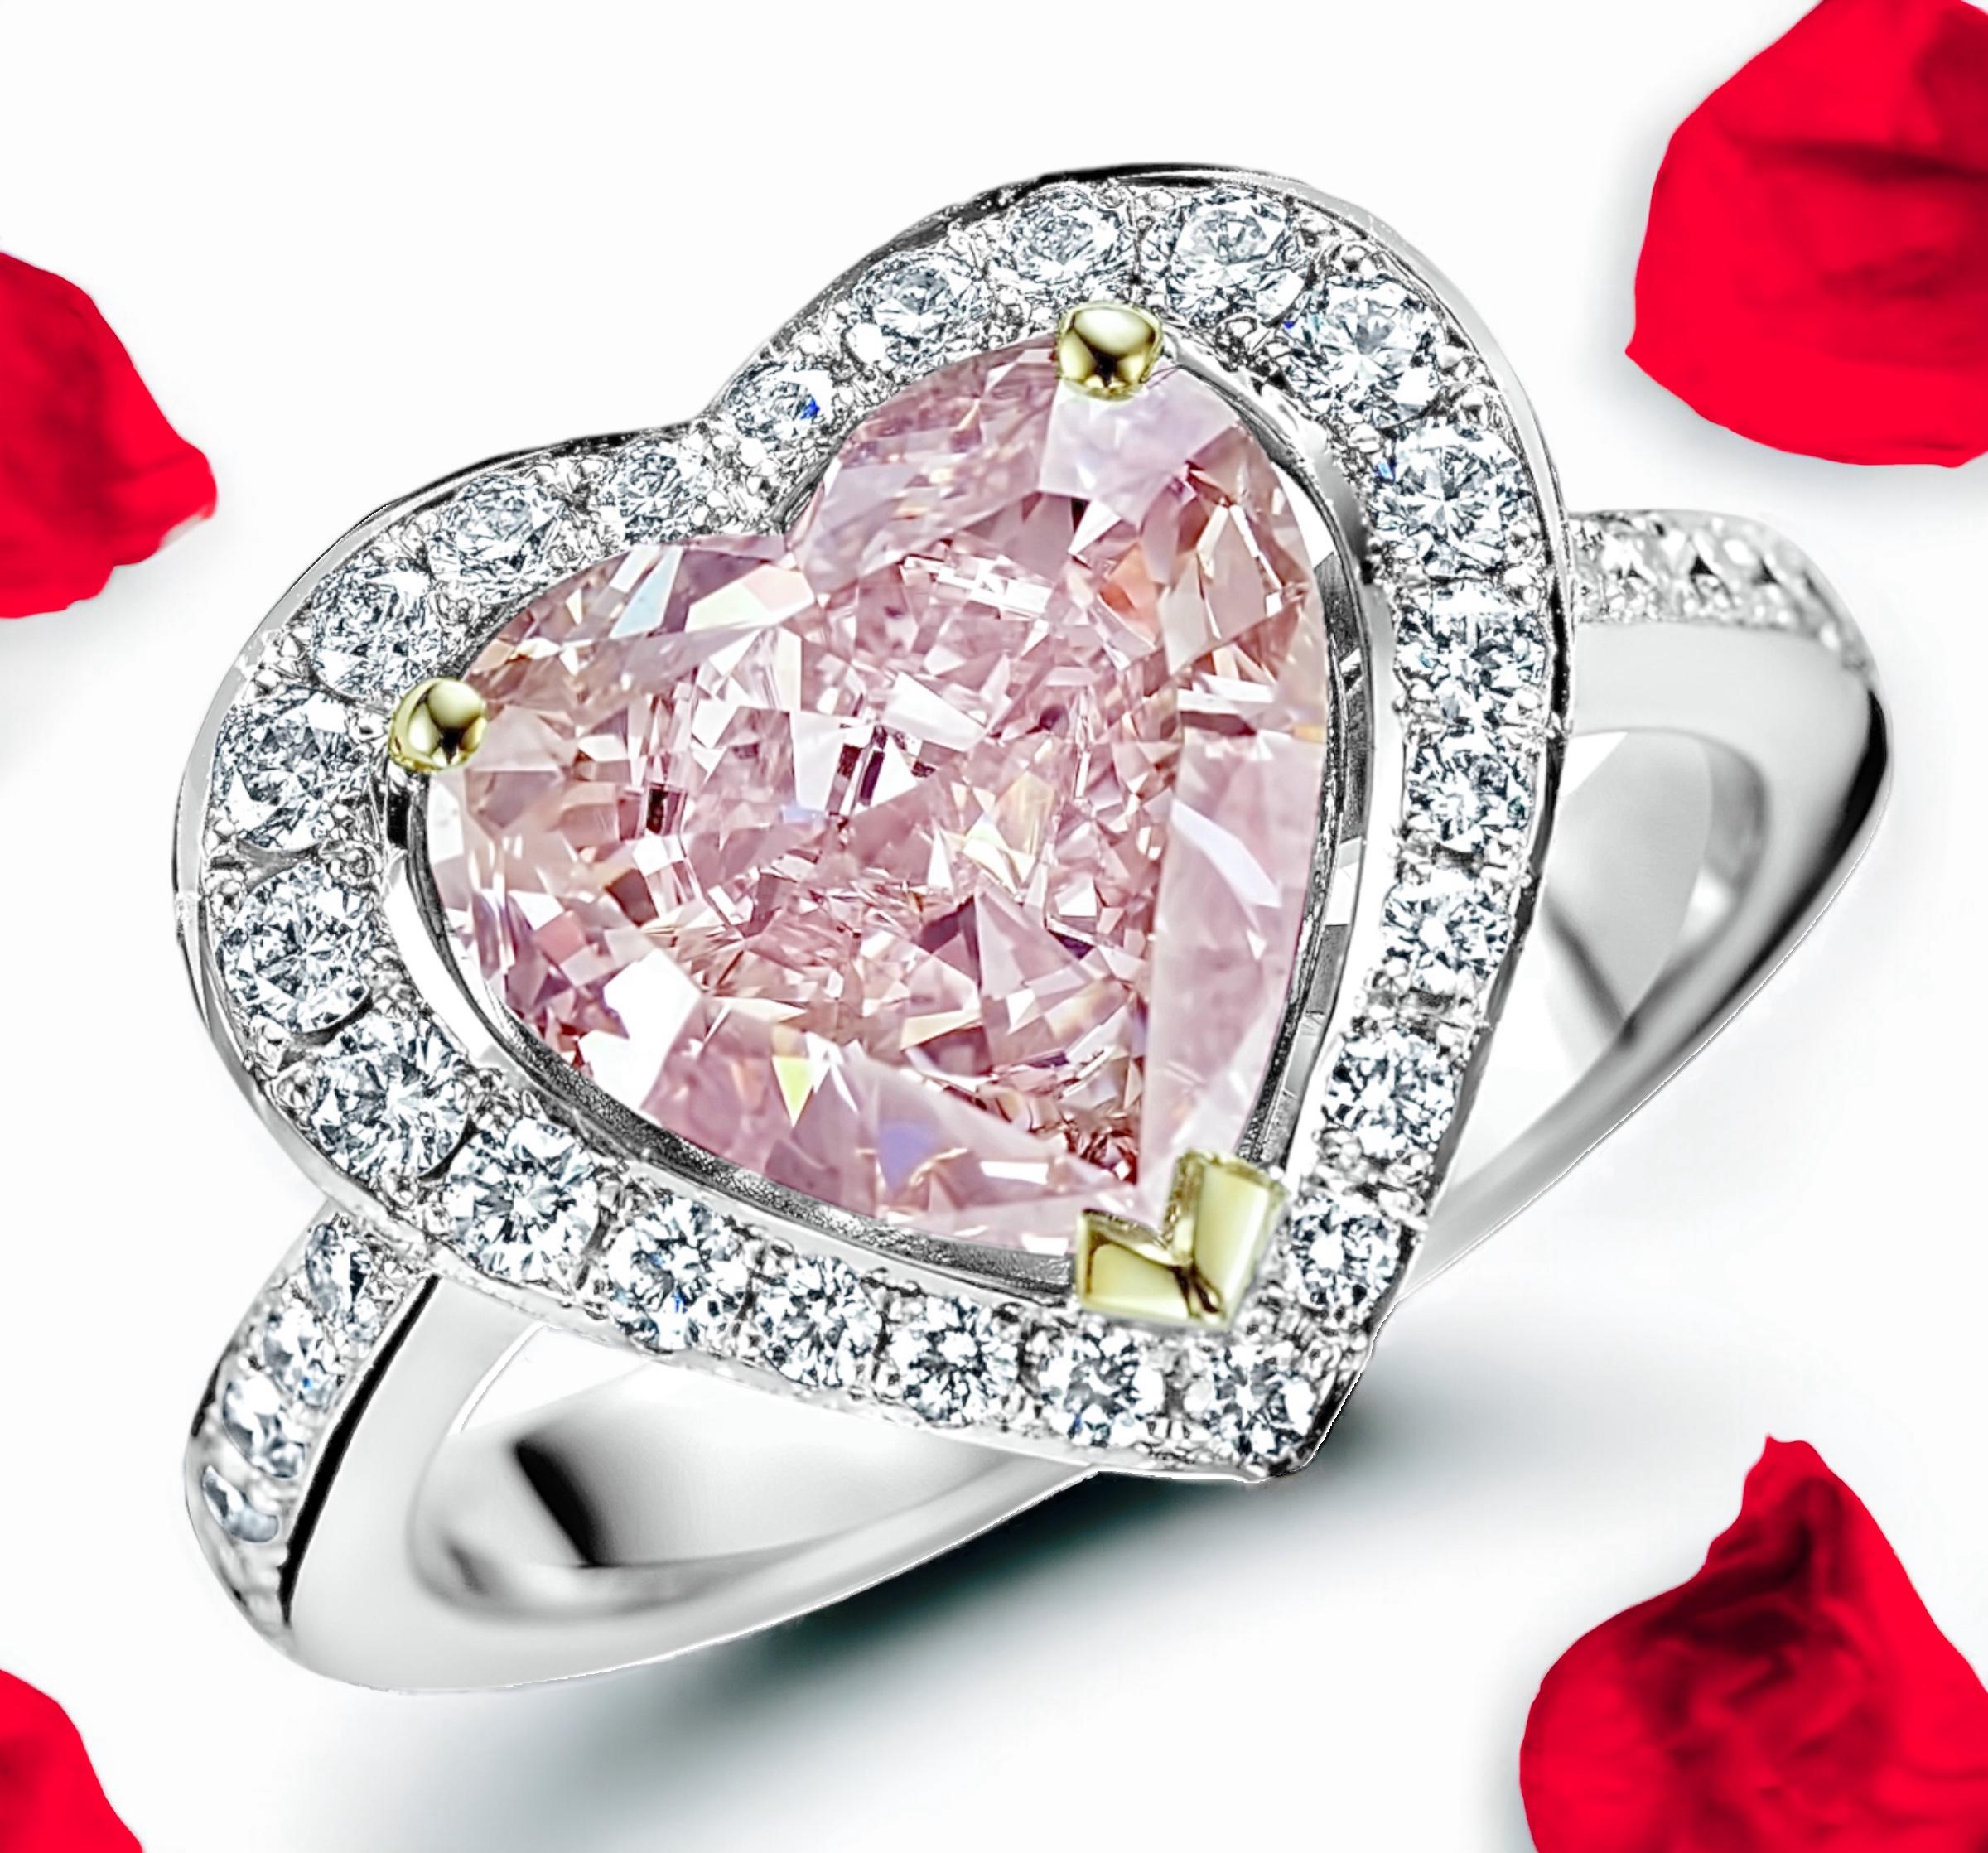 18 kt. White Gold Enhanced Pink Diamond Heart 2.78 ct. Ring, GIA Certificate For Sale 2